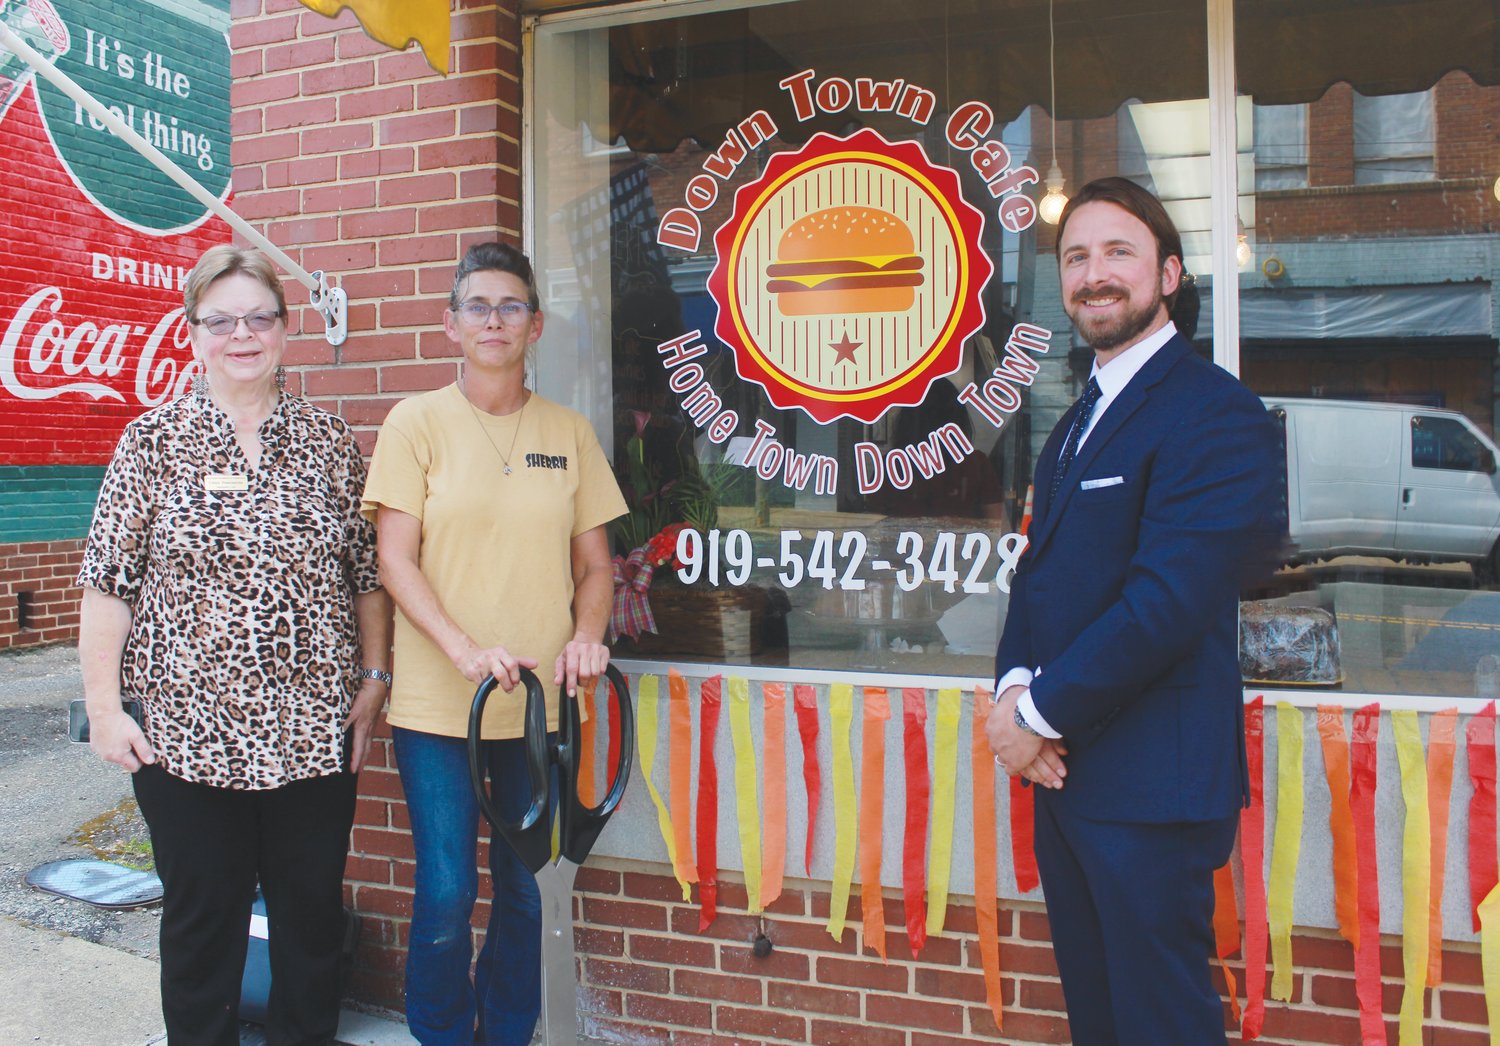 Chamber of Commerce President Cindy Poindexter, restaurant owner Sherrie Hatfield and Phillip Pappas, the Chatham County Small Business Center coordinator, stand in front of the Down Town Café in Siler City.